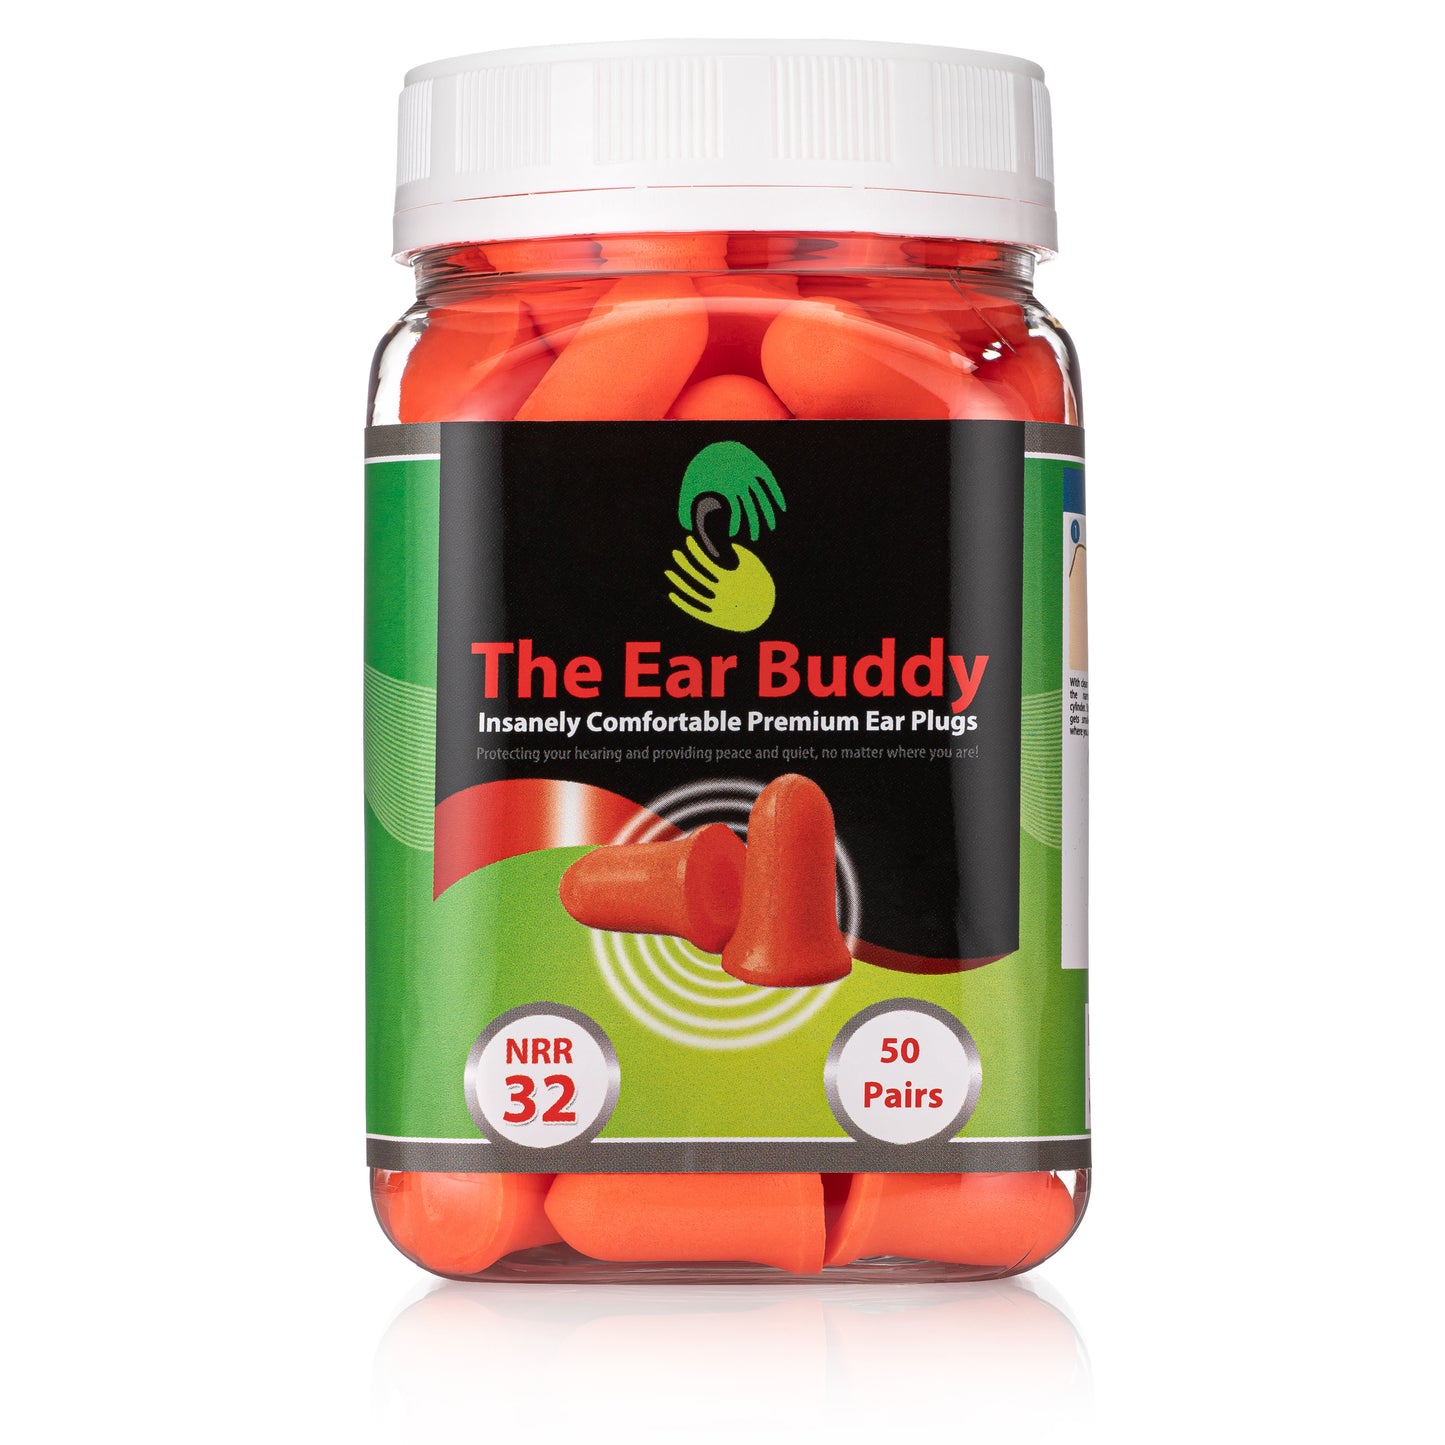 The Ear Buddy Premium Soft Foam Ear Plugs, Noise Cancelling Earplugs for Sleeping, Hearing Protection for Concerts, Work, Shooting & Travel, Noise Reduction Rating 32 Decibels, 50 Pairs